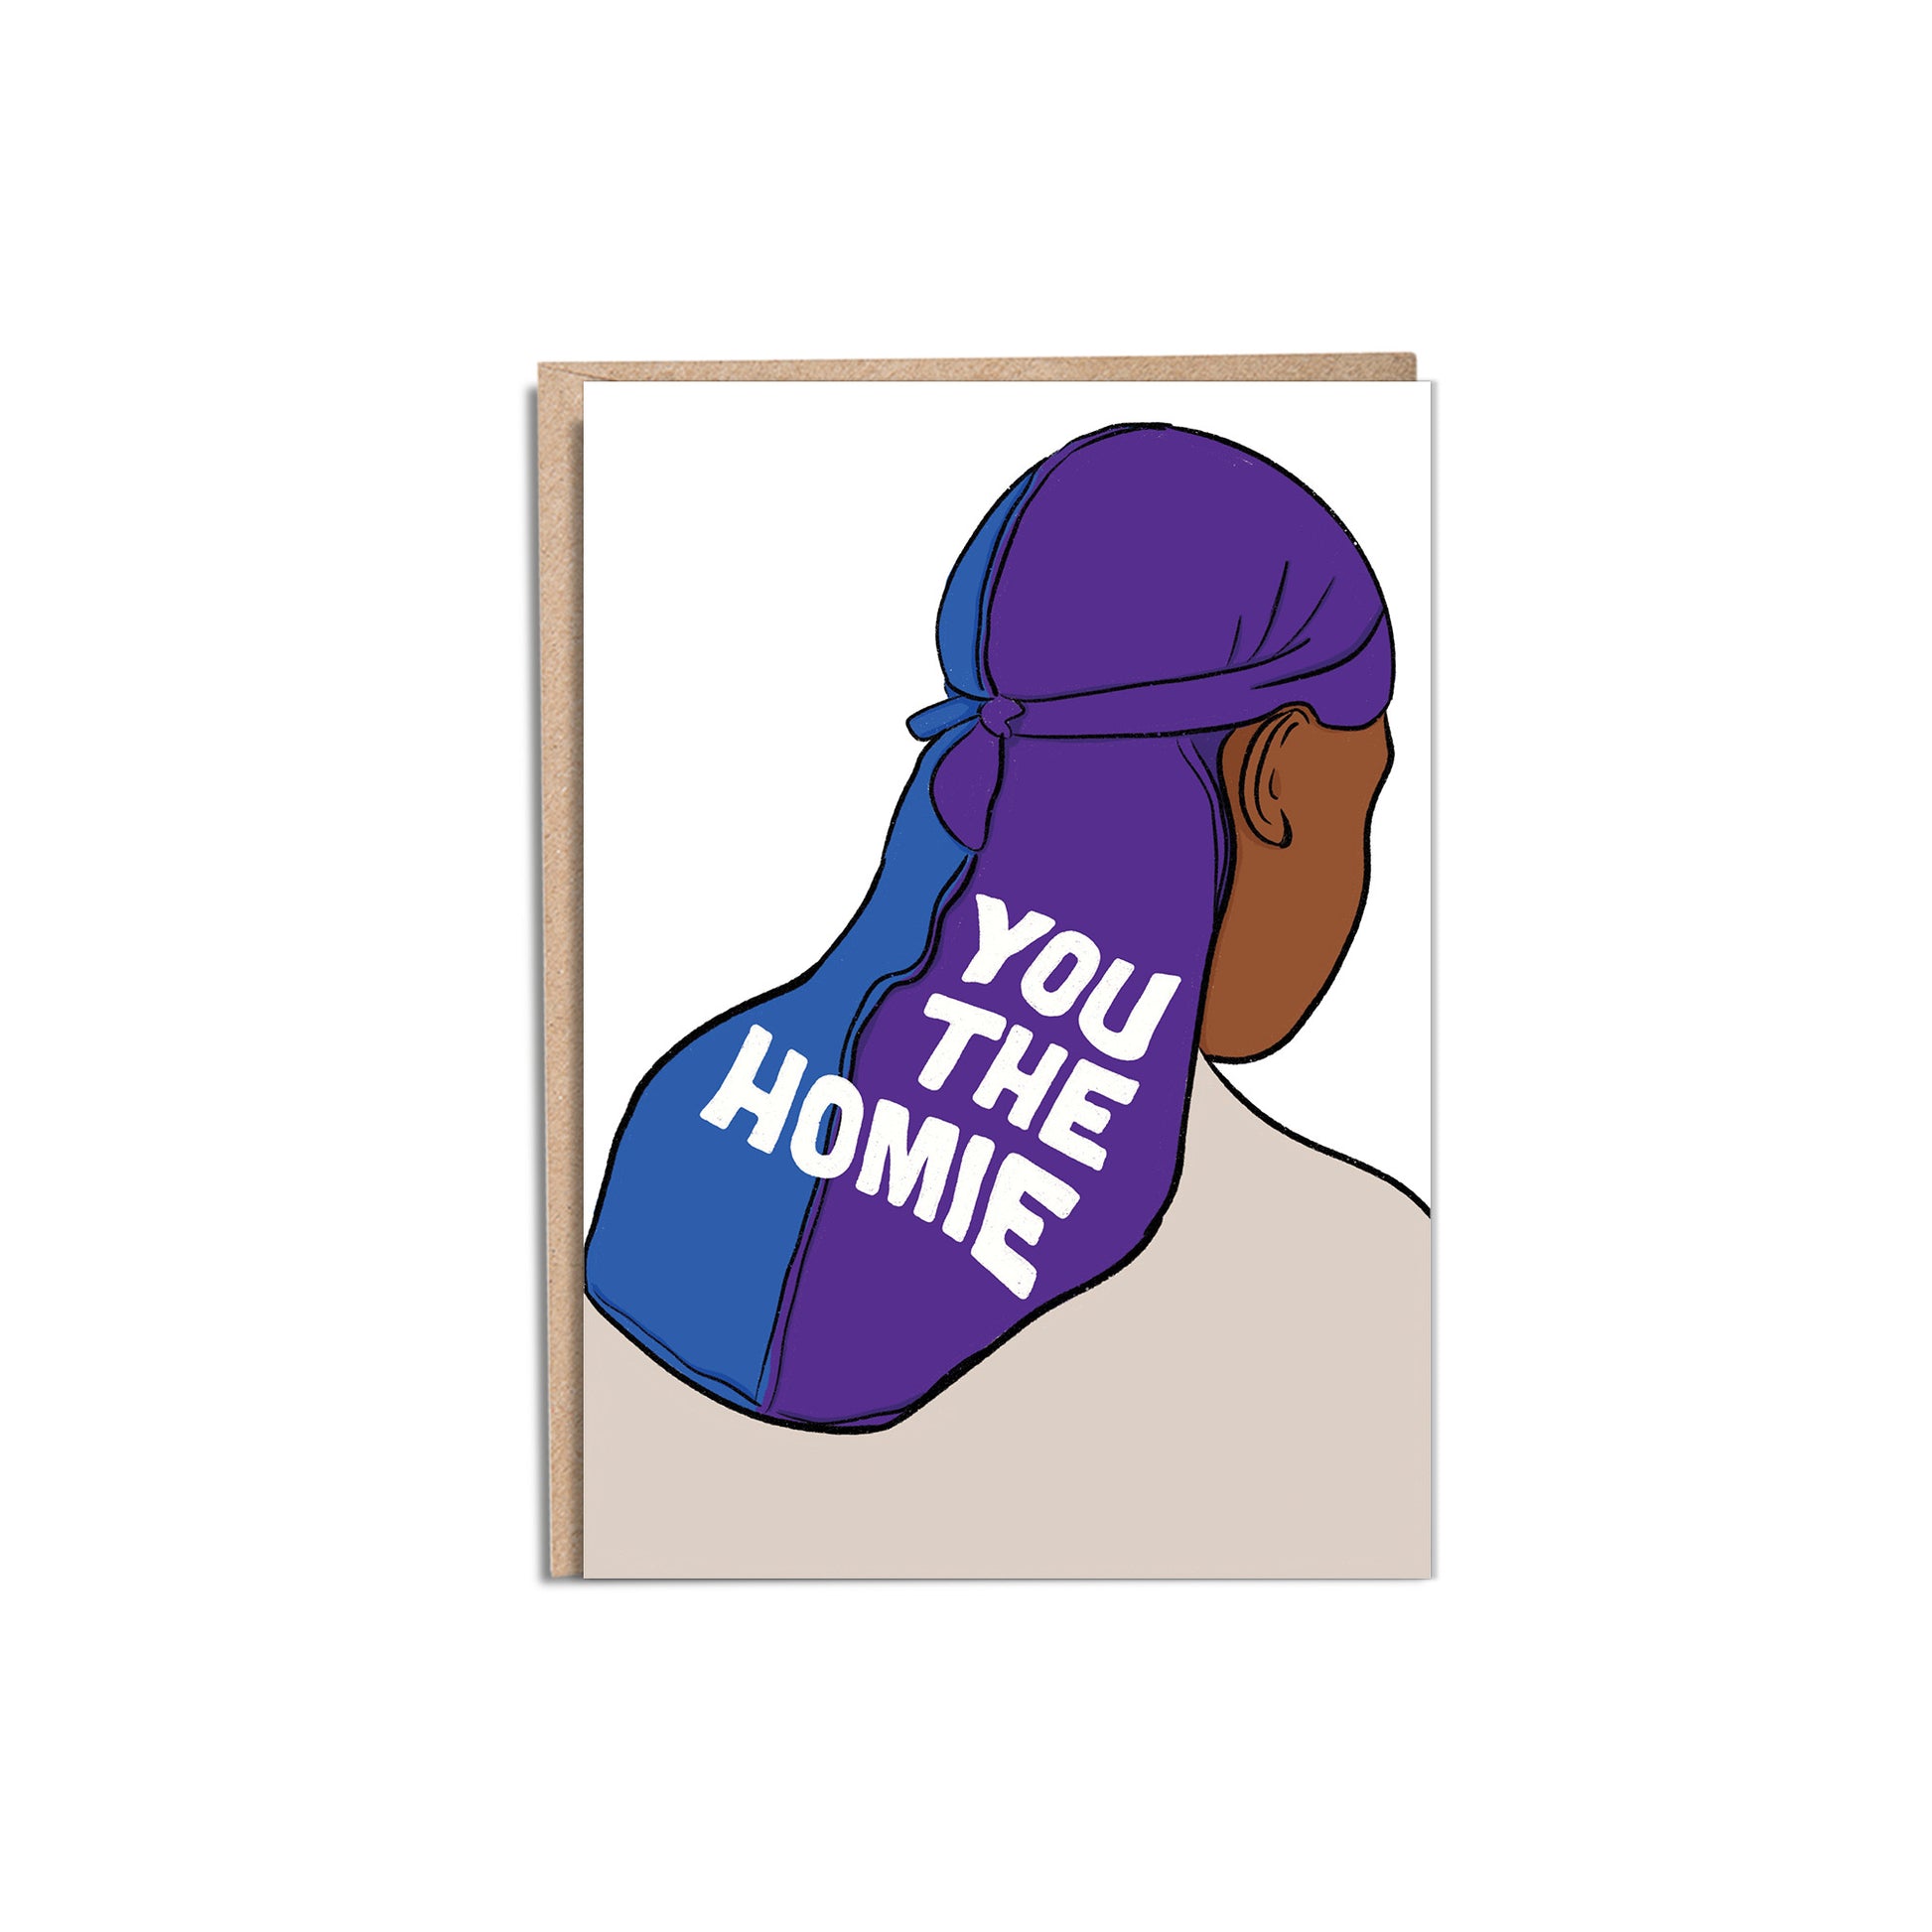 You The Homie 5x7” greeting card from Goods Made By Digitrillnana, Ashley Fletcher. Black Woman Owned. Perfect card for friendship, Black men, LGBTQIA.